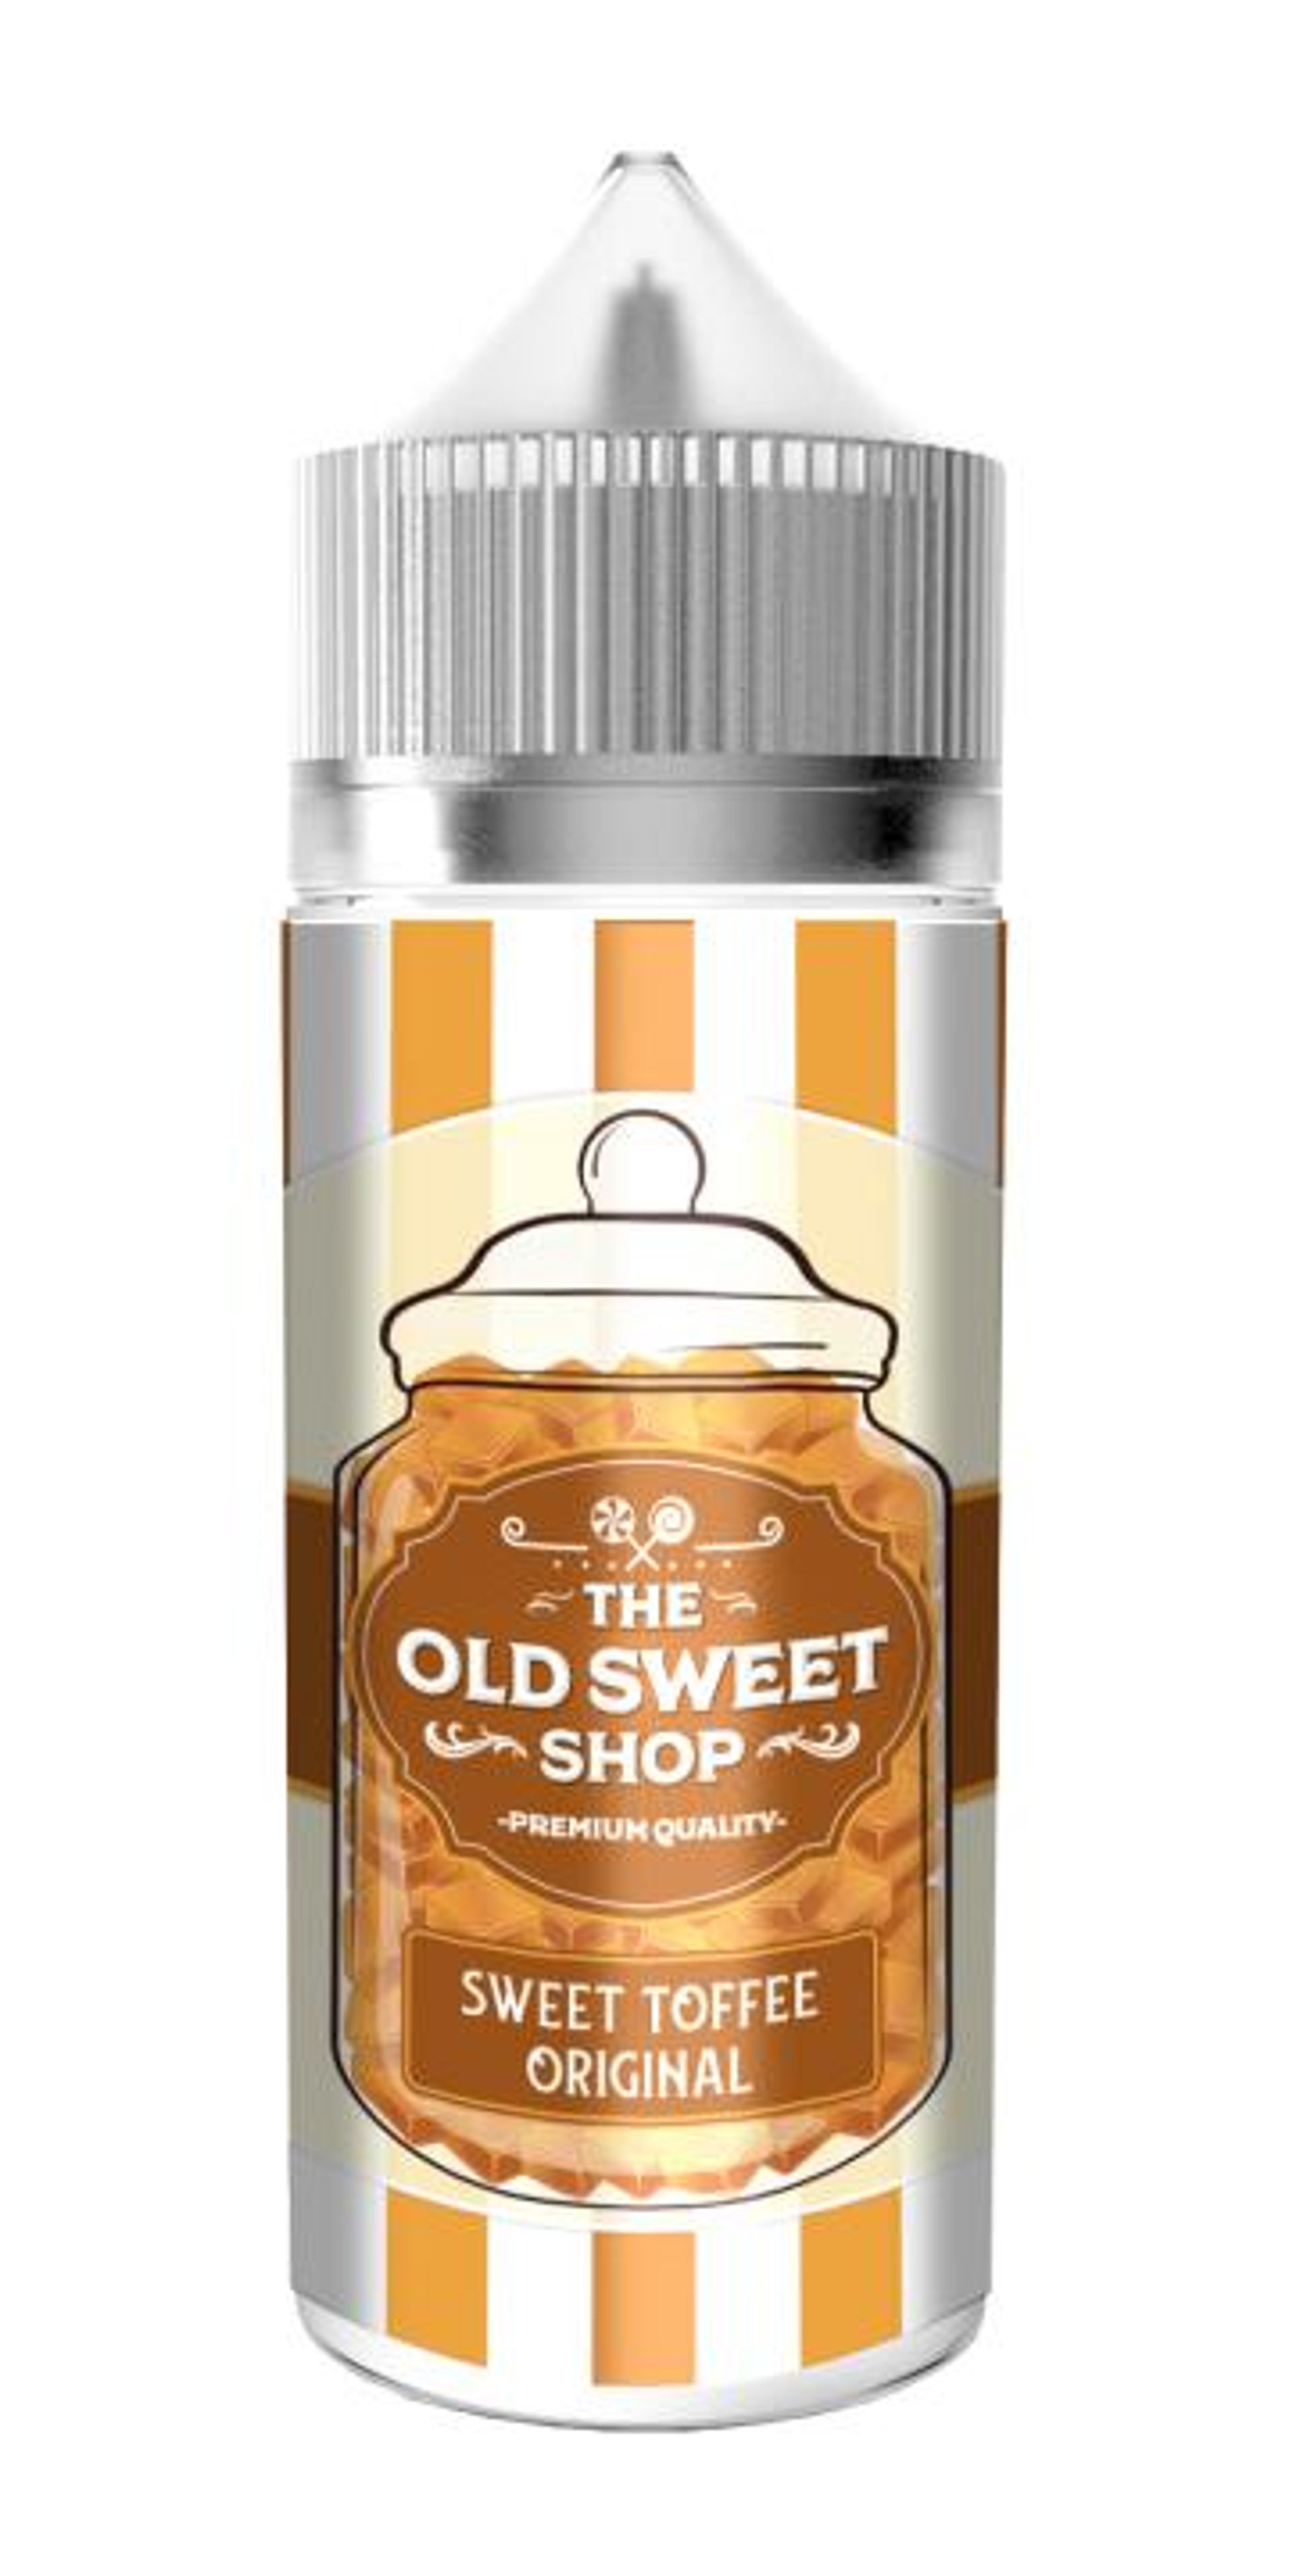 Image of Sweet Toffee Original by The Old Sweet Shop